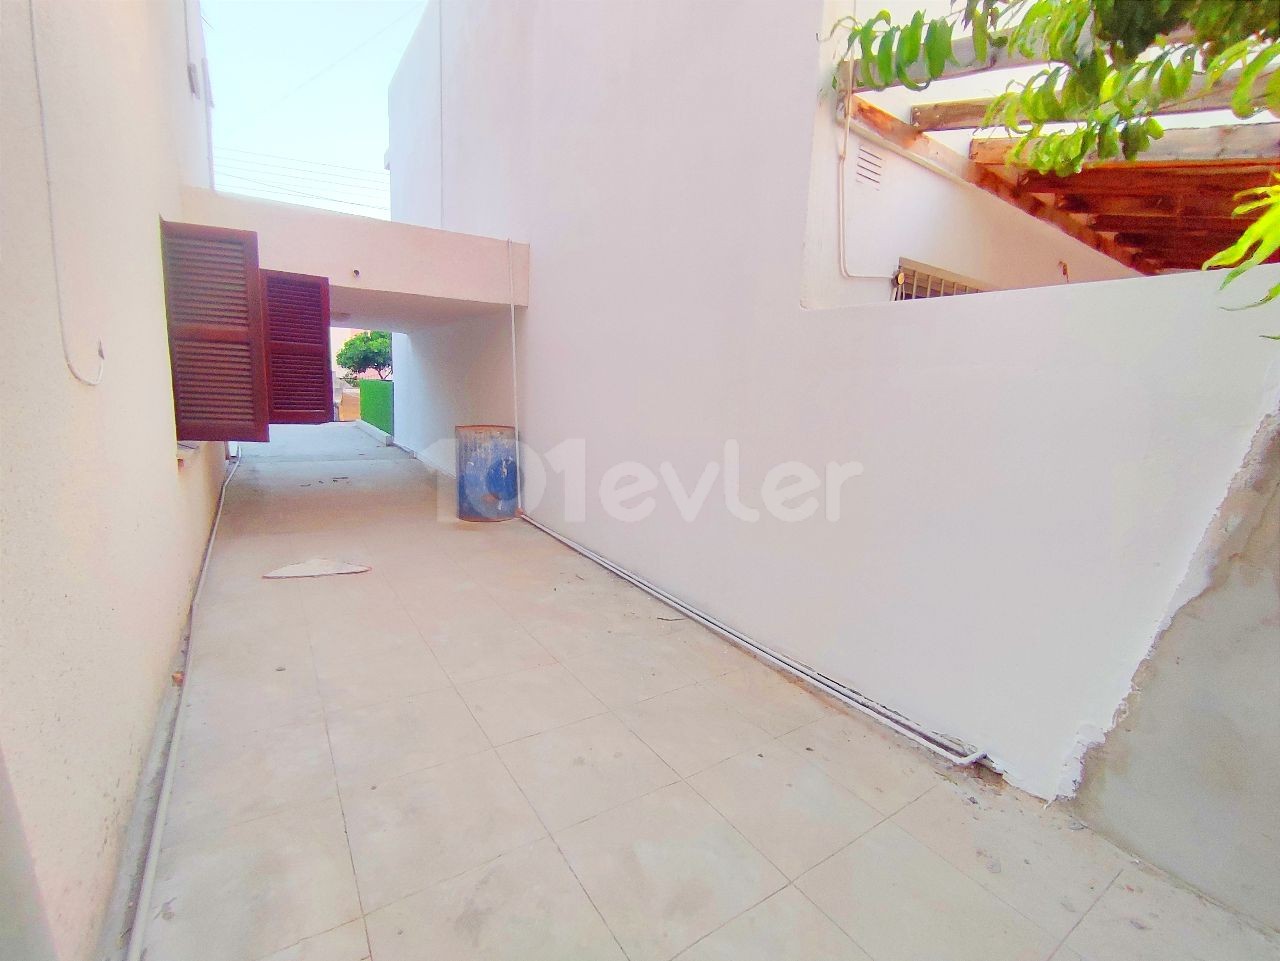 Spacious 3 Bedroom Semi Detached House for Rent in the Center of Kyrenia